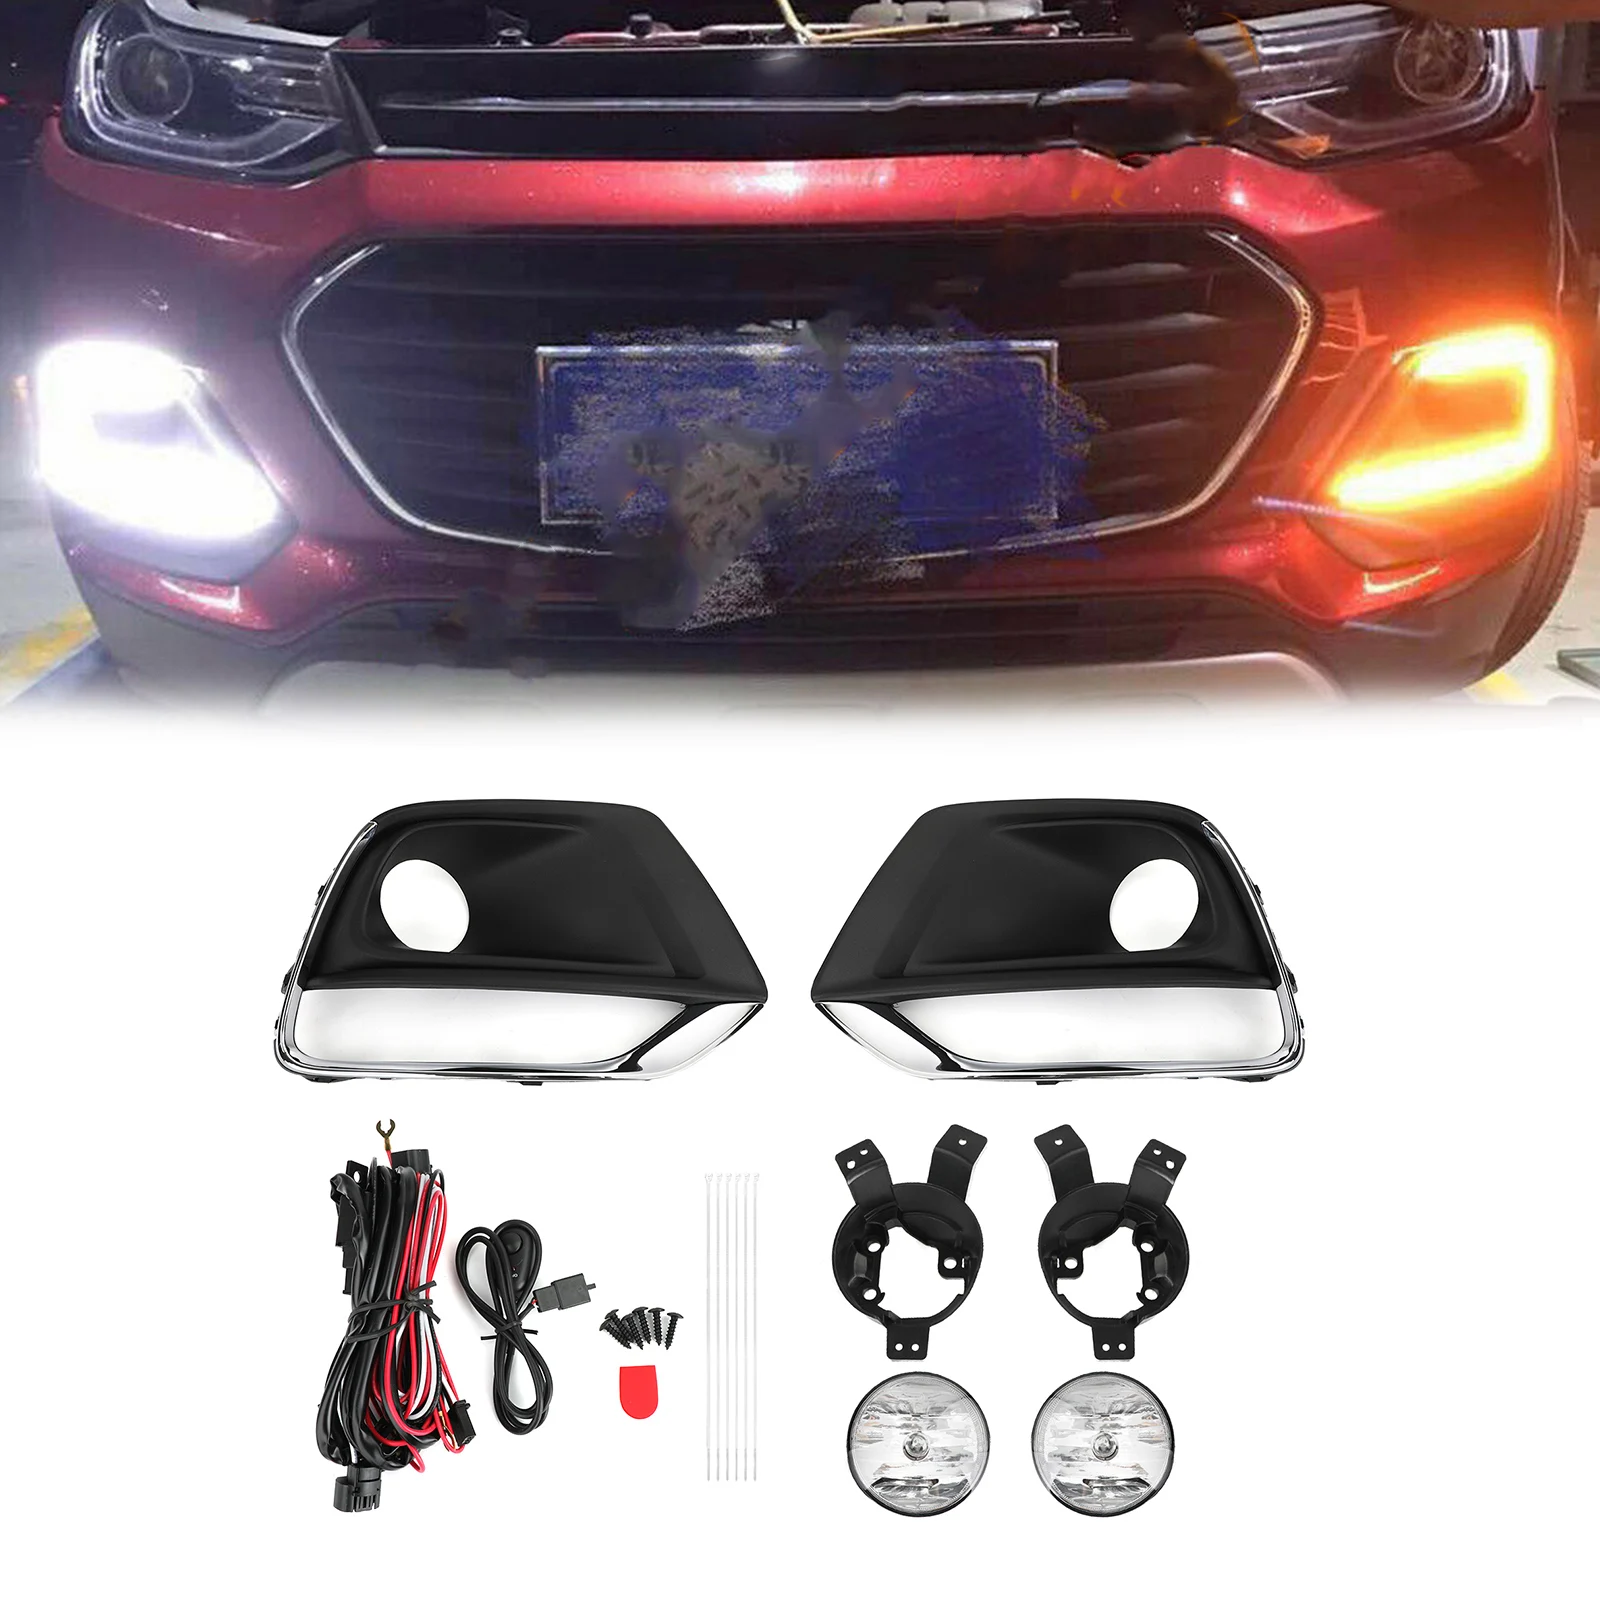 

Areyourshop w/Wiring Switch Pair LH+RH Fits For Chevy Trax 2017 2018 2019 2020 Bumper Fog Lights Lamp